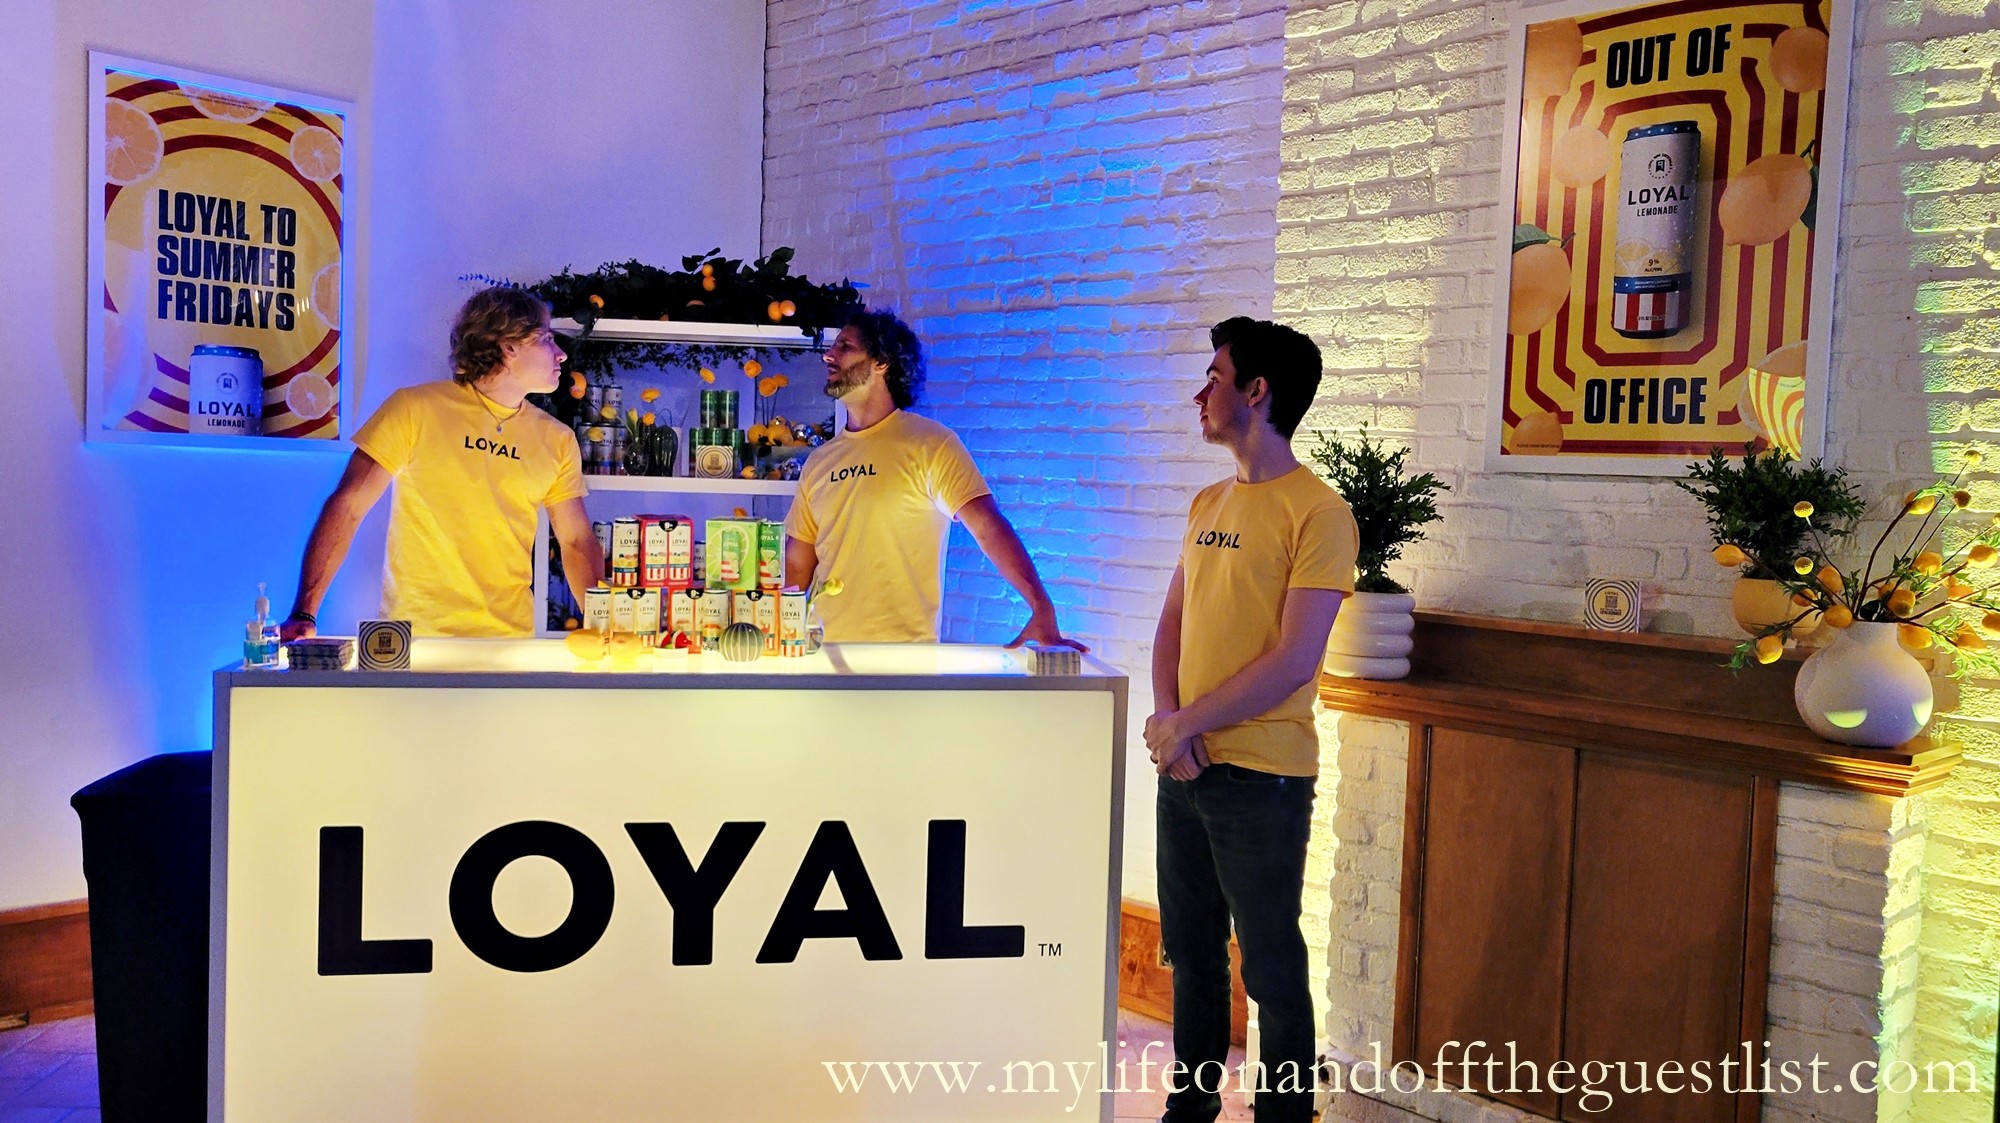 Loyal 9 Cocktails Wants You to Have Less Week & More Weekend